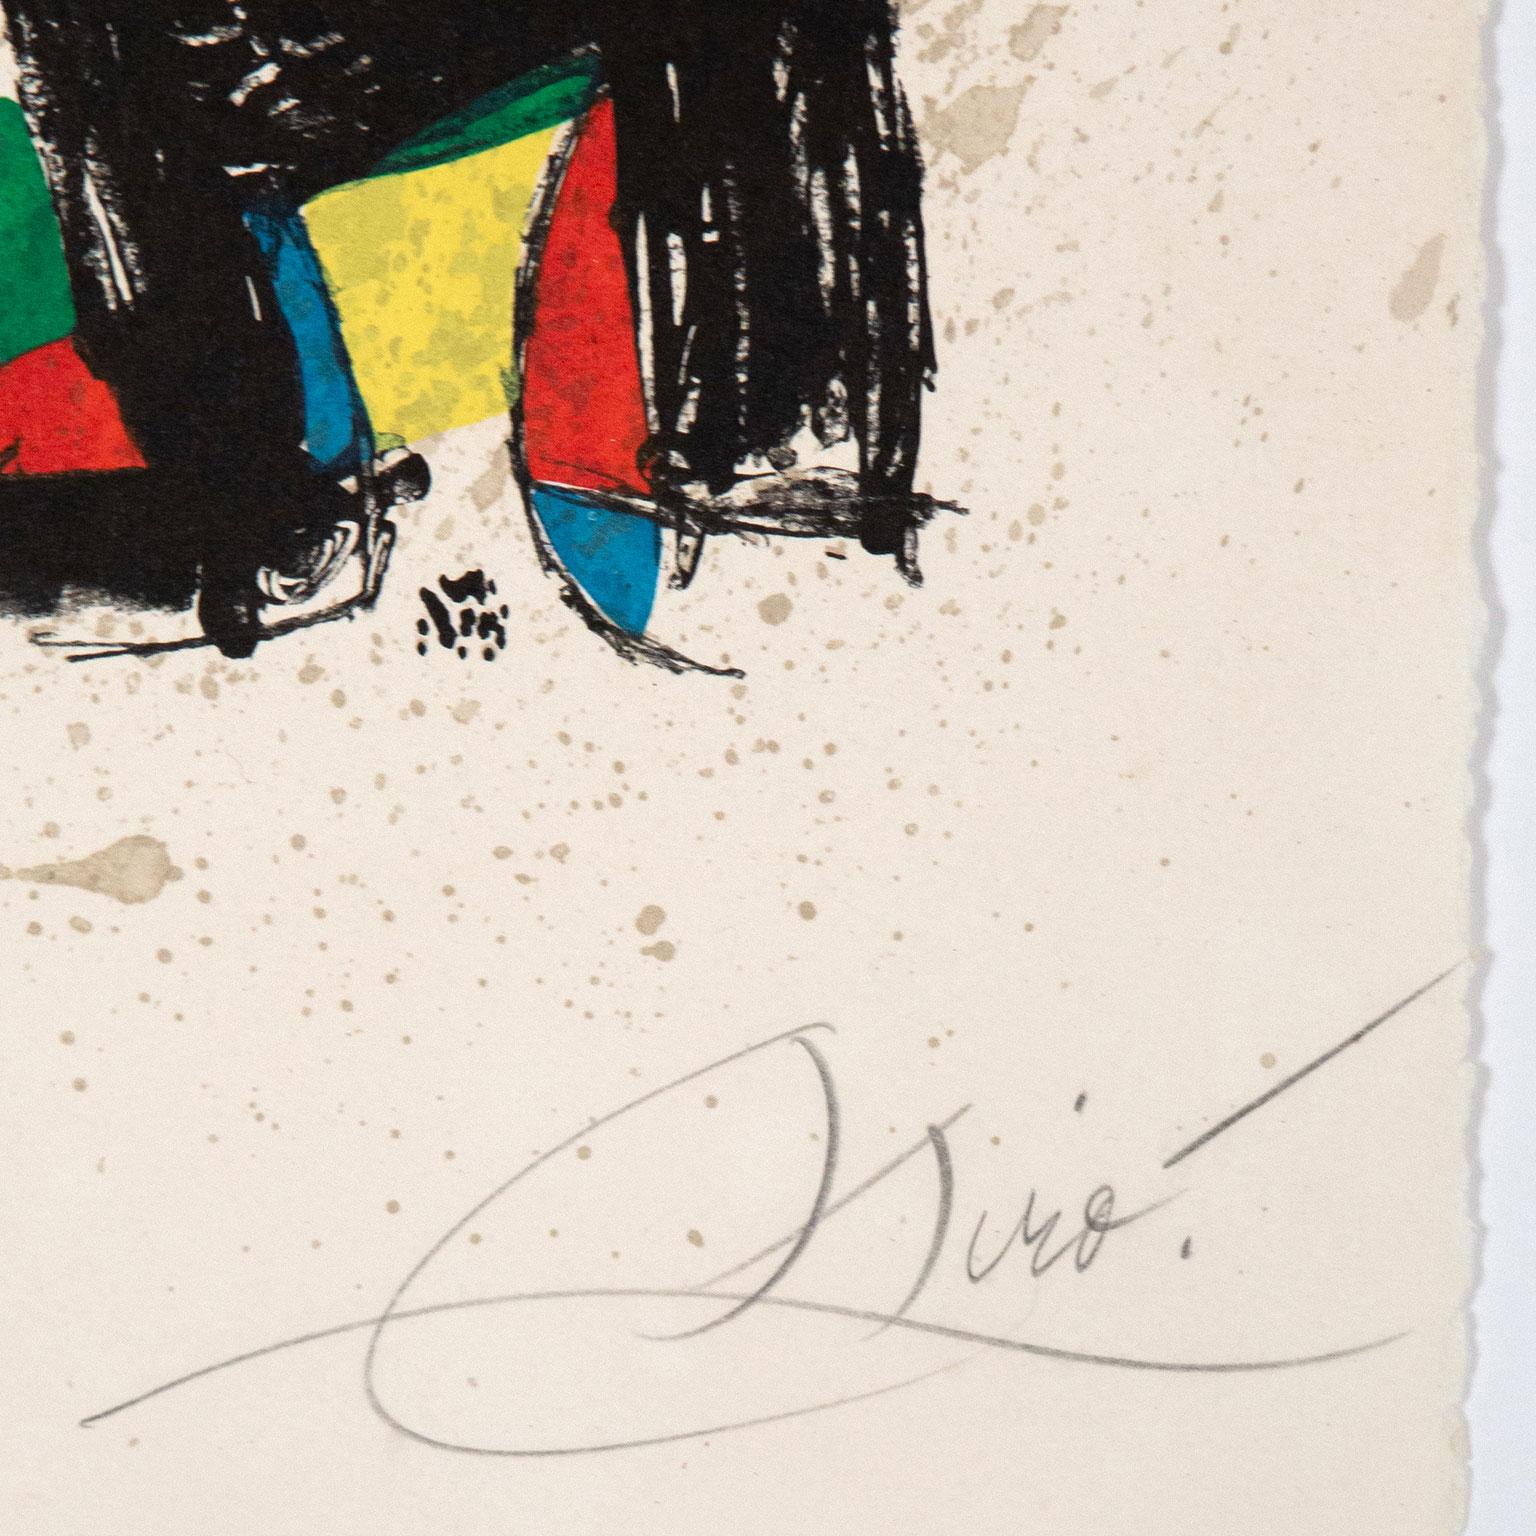 15 ans Poligrafa - Abstract Expressionist Print by Joan Miró